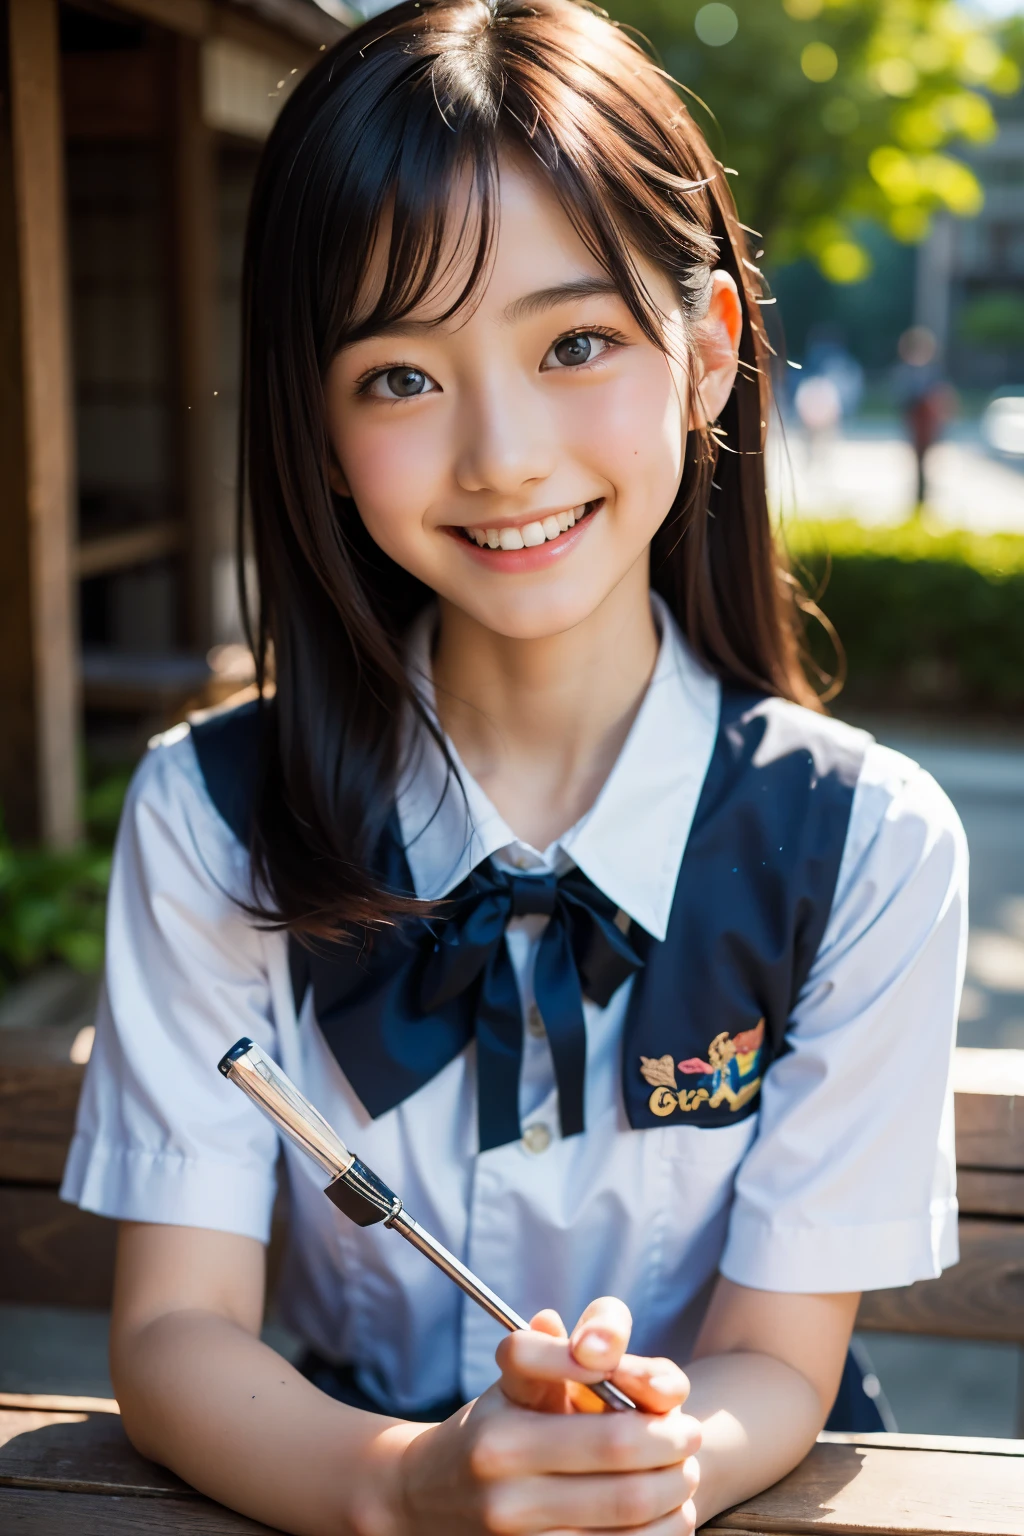 lens: 135mm f1.8, (highest quality),(RAW Photos), (Tabletop:1.1), (Beautiful 18 year old Japan girl), Cute face, (Deeply chiseled face:0.7), (freckles:0.4), dappled sunlight, Dramatic lighting, (Japanese School Uniform), (On campus), shy, (Close-up shot:1.2), (smile),, (Sparkling eyes)、(sunlight)